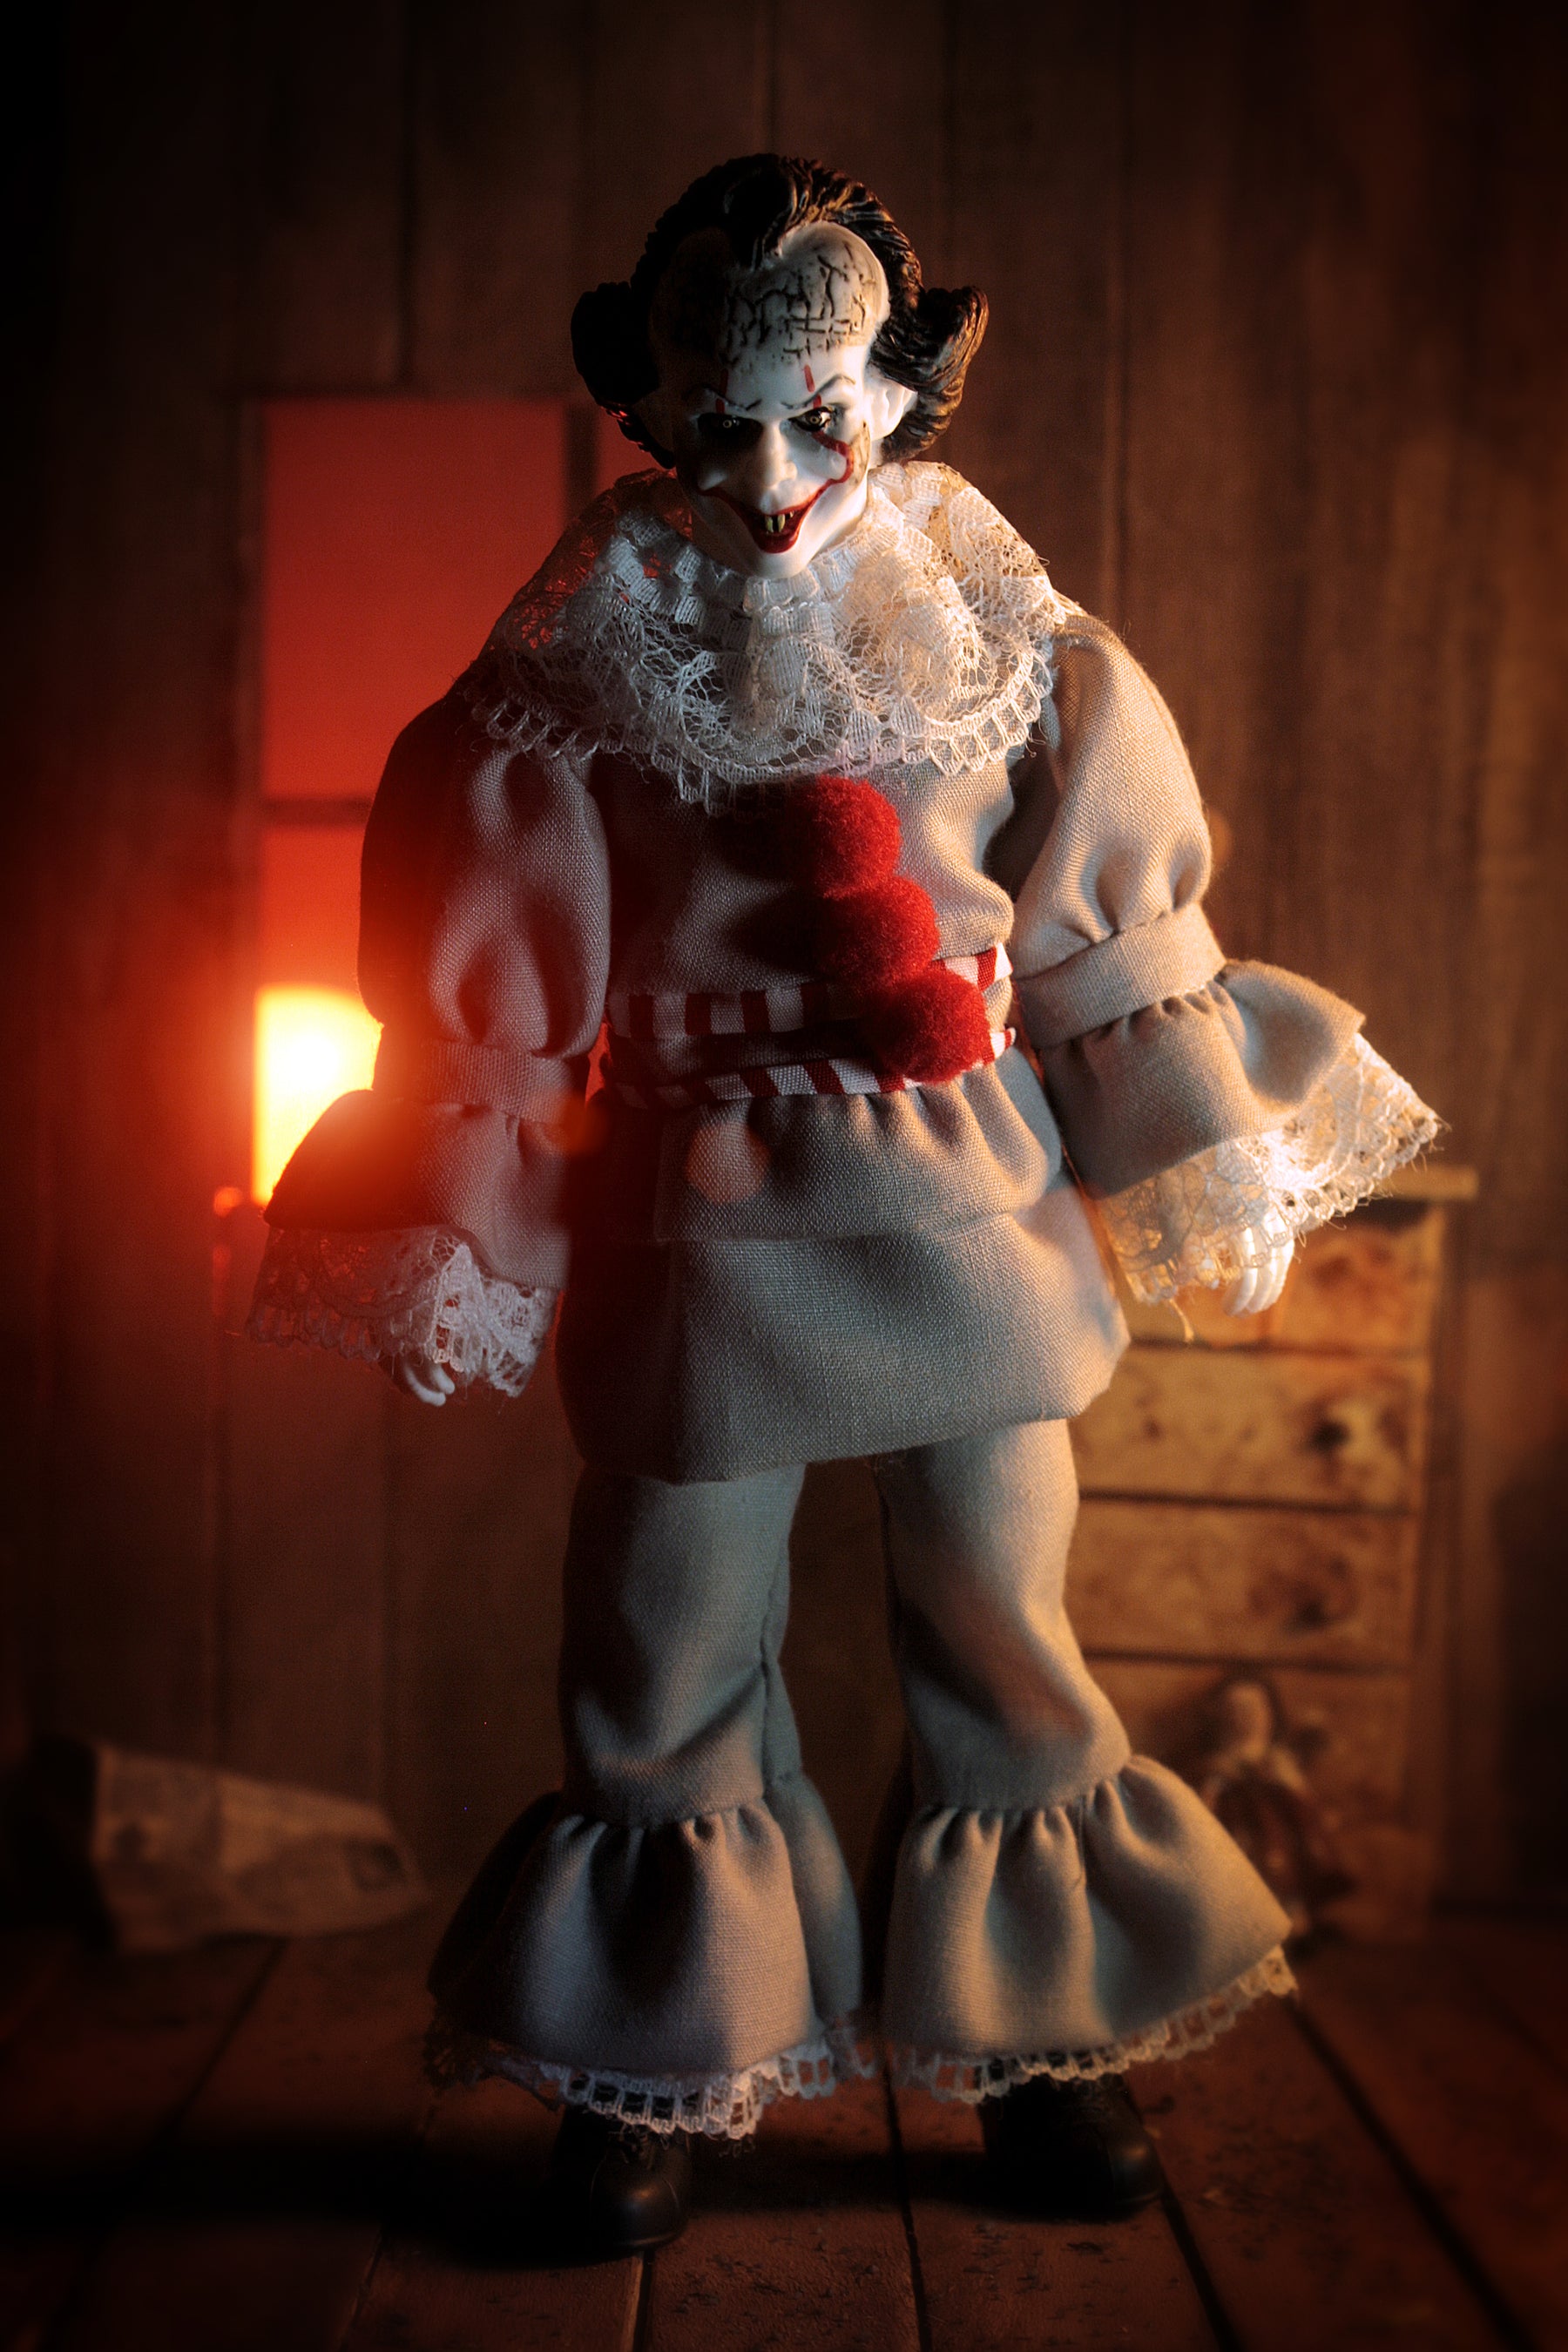 Mego Horror Wave 14 - Pennywise (2017) 8" Action Figure